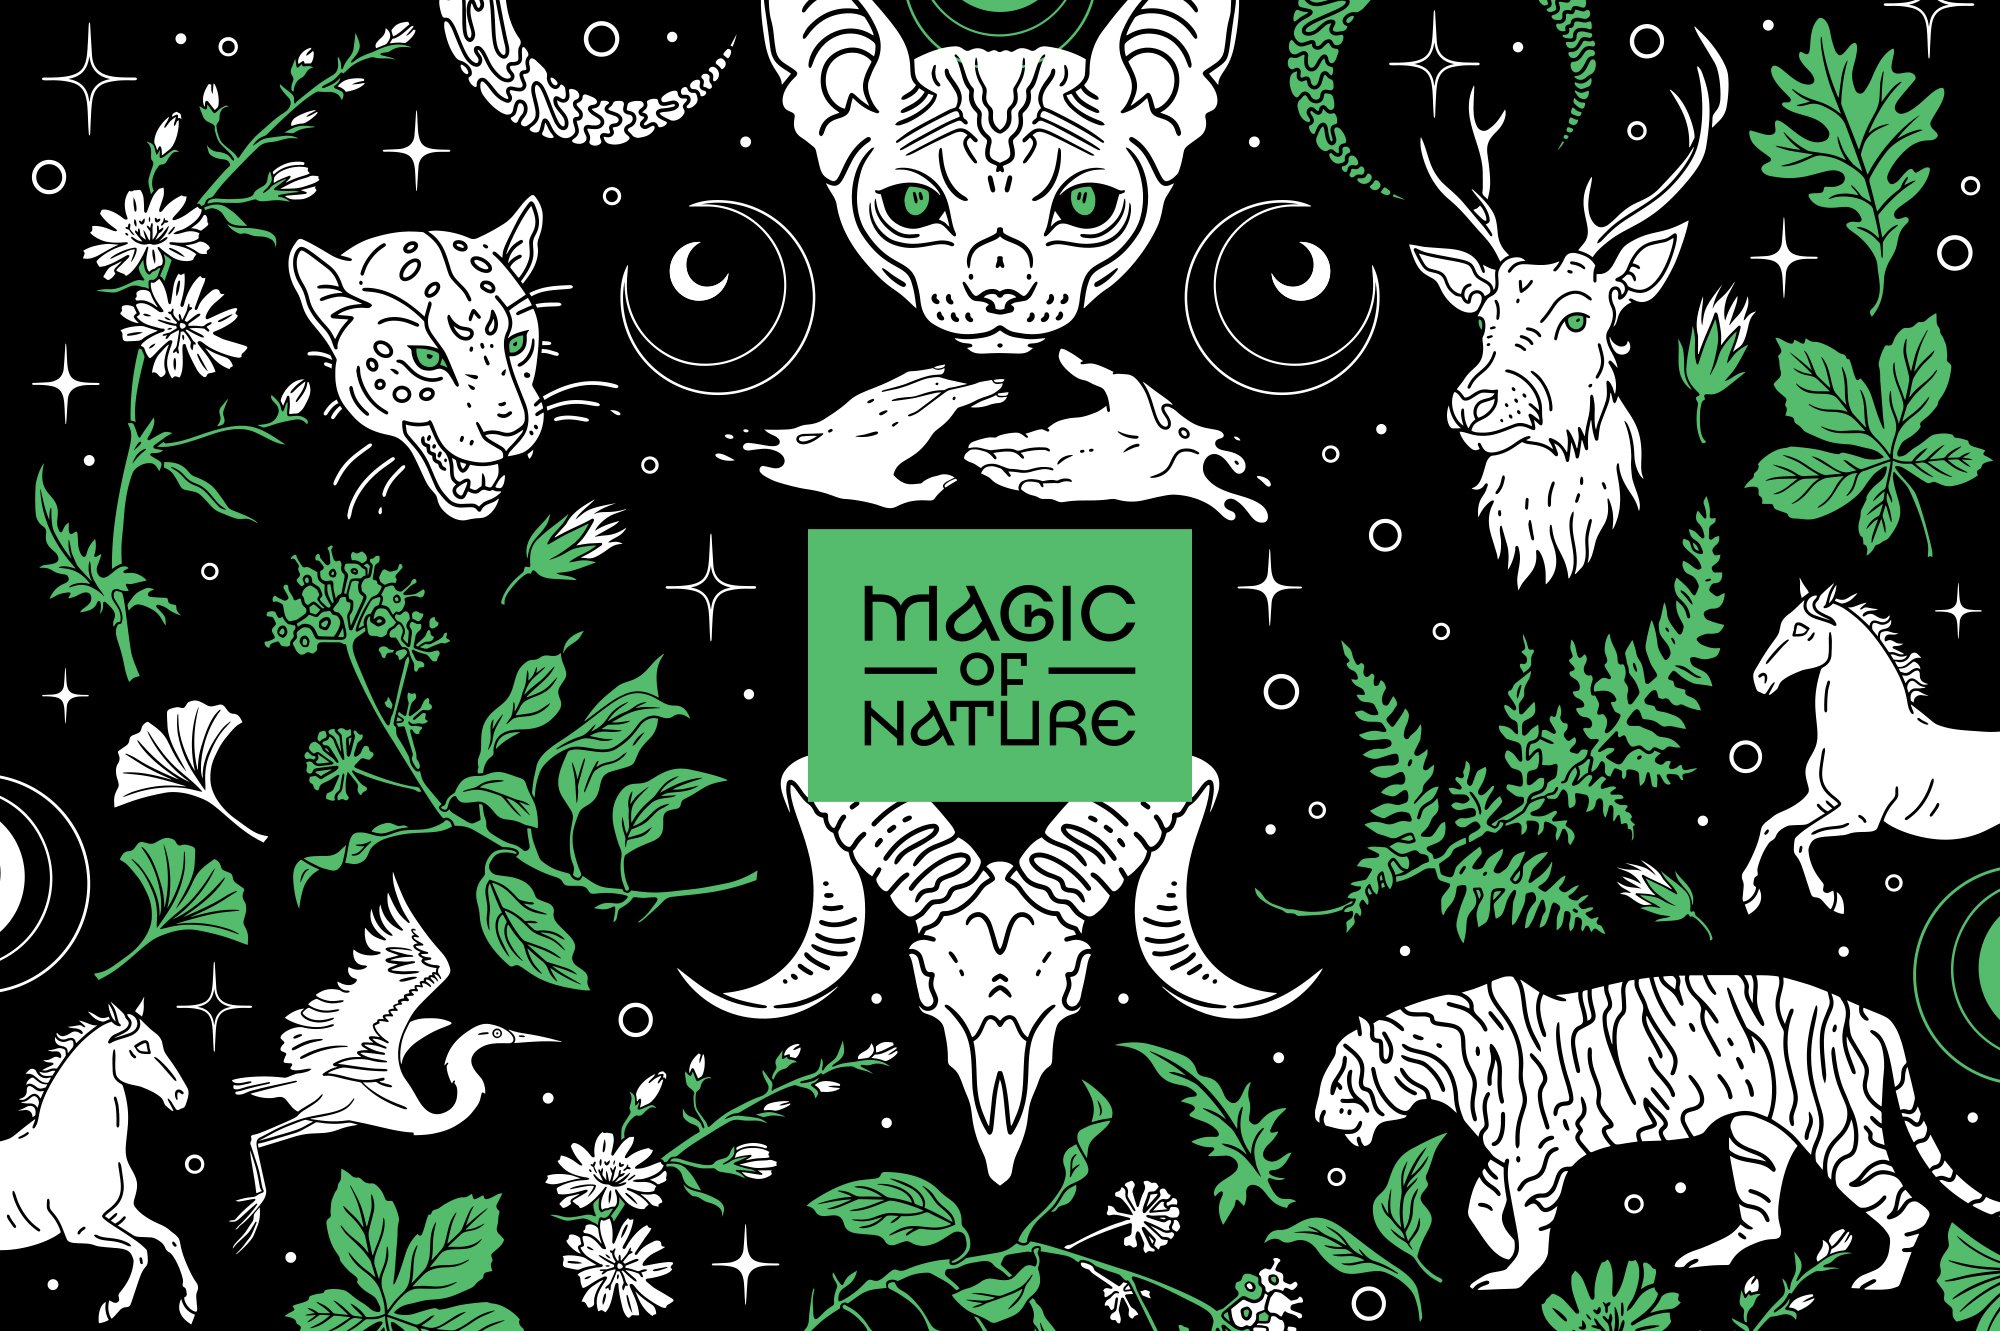 Green Witch. Magic of Nature cover image.